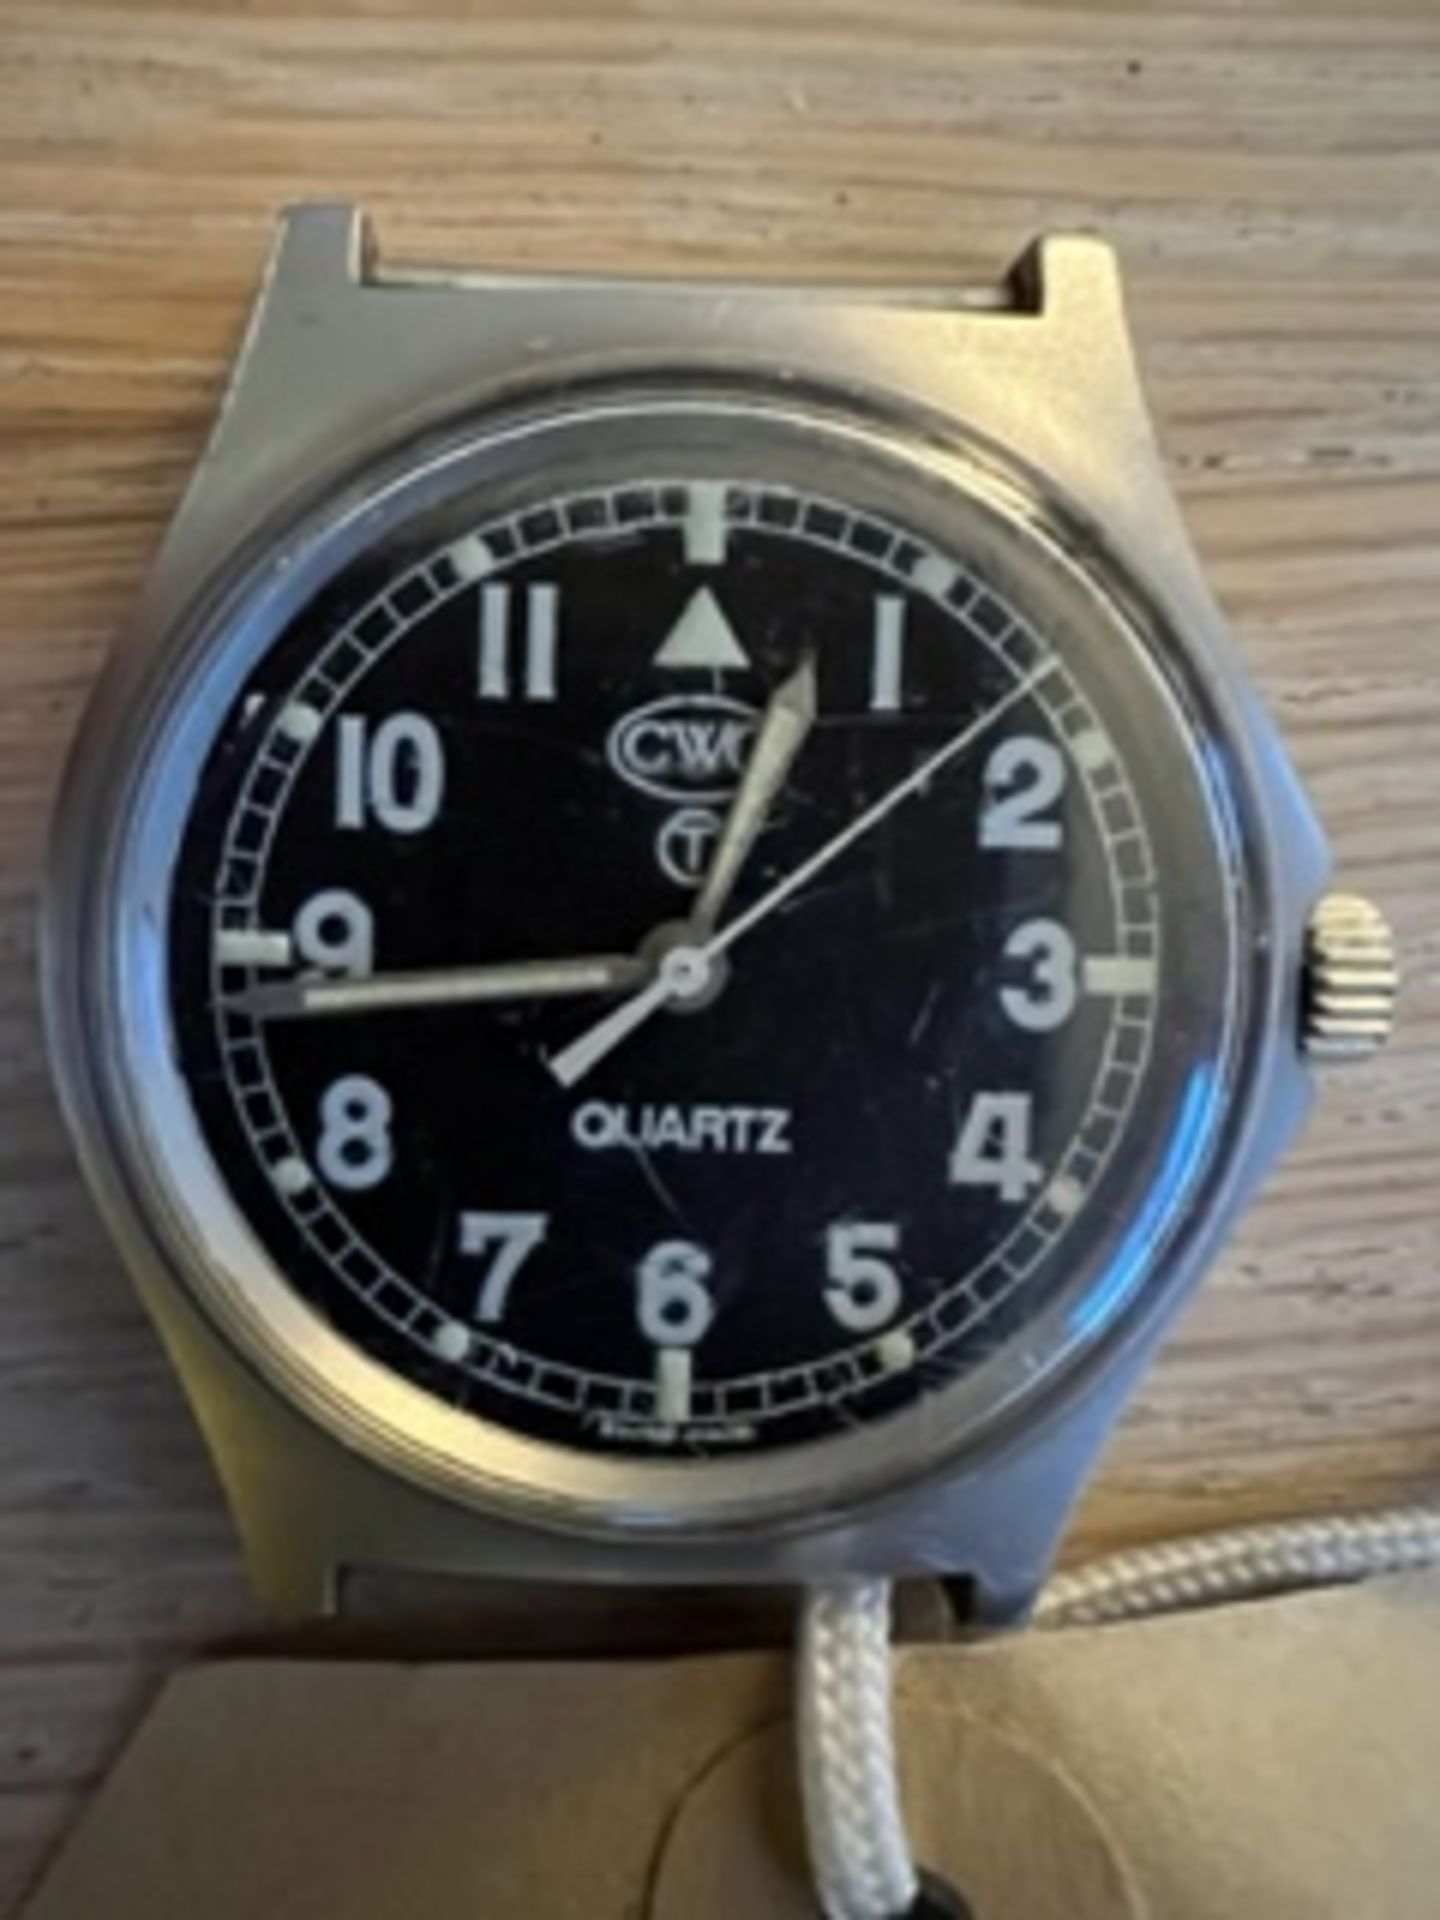 RARE CWC 0552 R. MARINES ISSUE SERVICE WATCH NATO MARKS DATE 1989 NEW BATTERY FITTED - Image 2 of 6